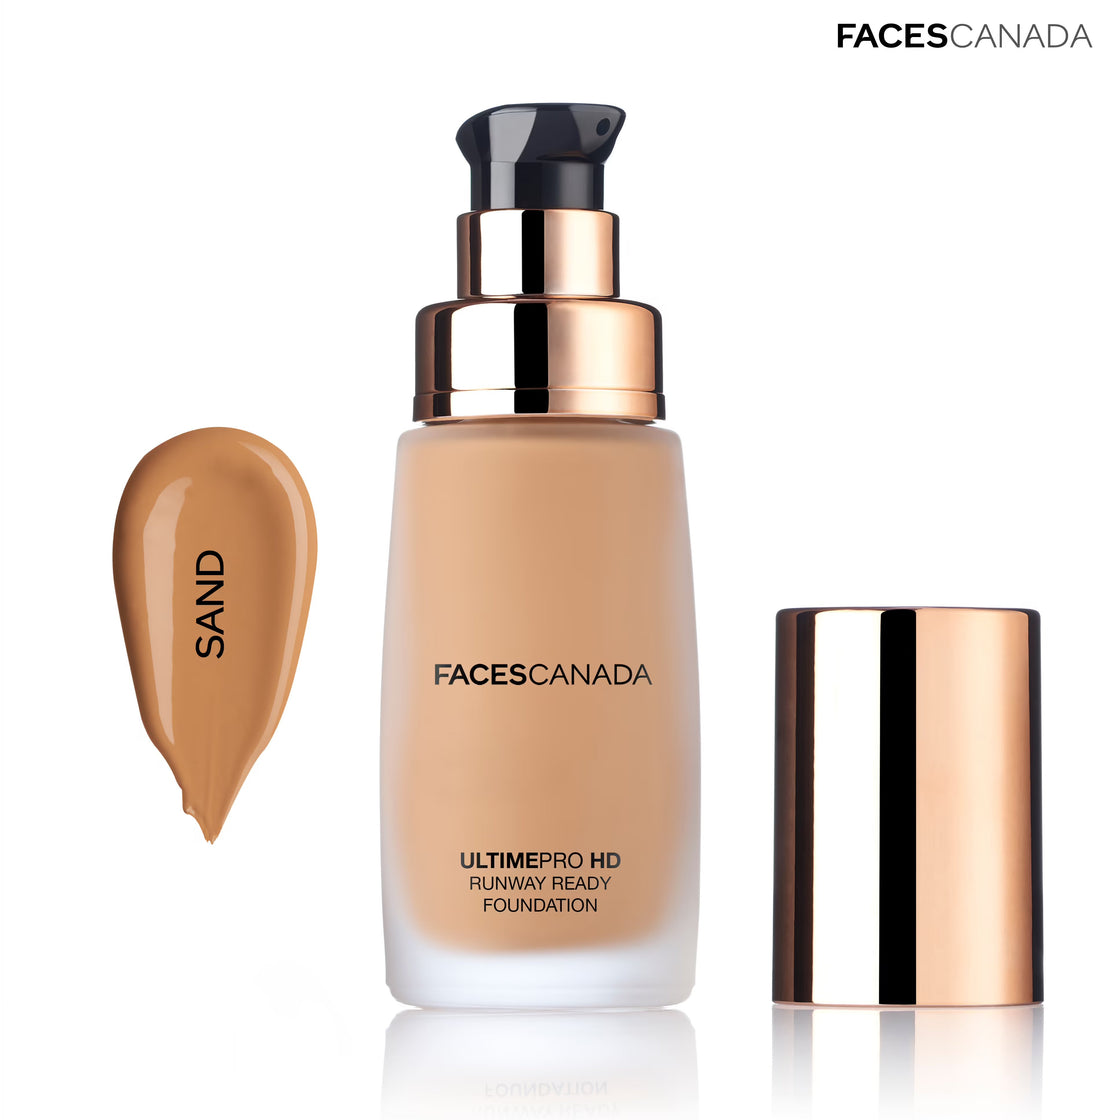 Faces Canada Ultime Pro Hd Runway Ready Foundation -30Ml-9